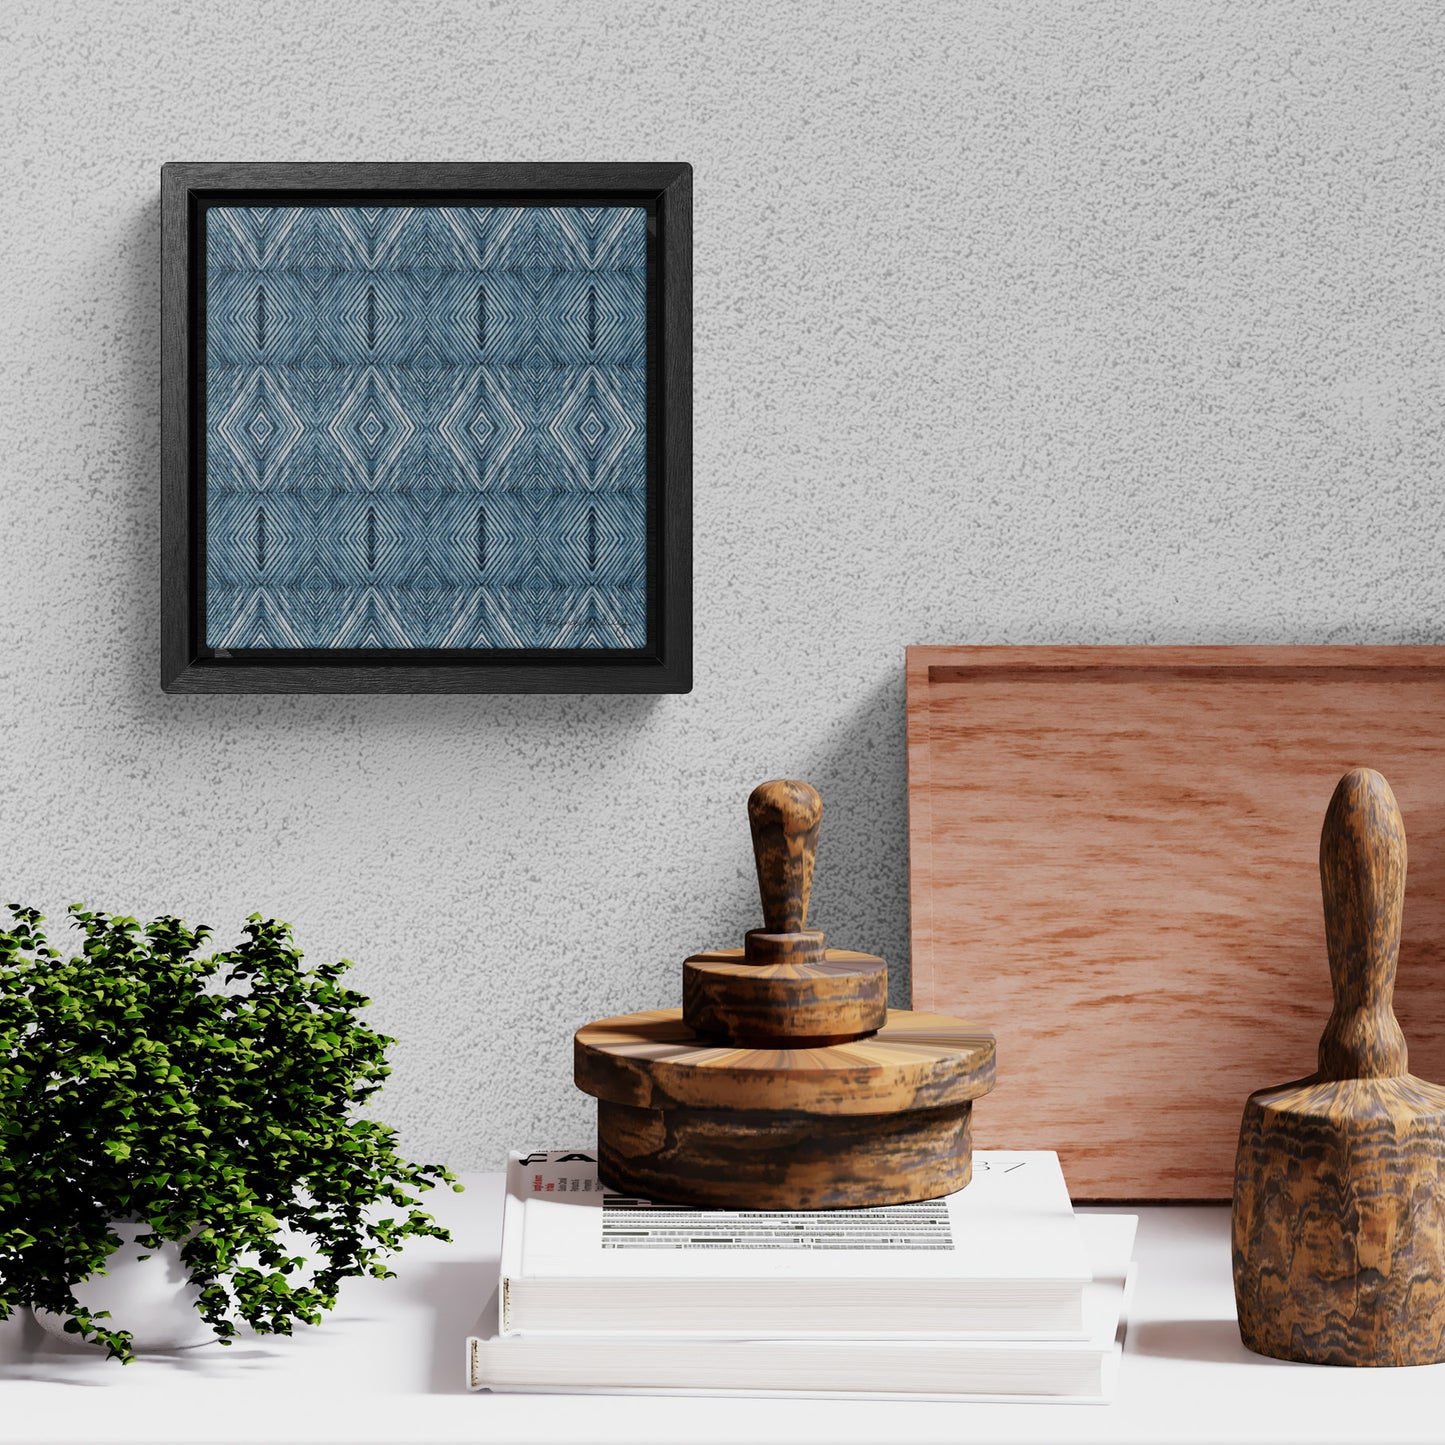 Framed Mini Canvas Print featuring a blue abstract diamond pattern, hanging above artist workroom tools.